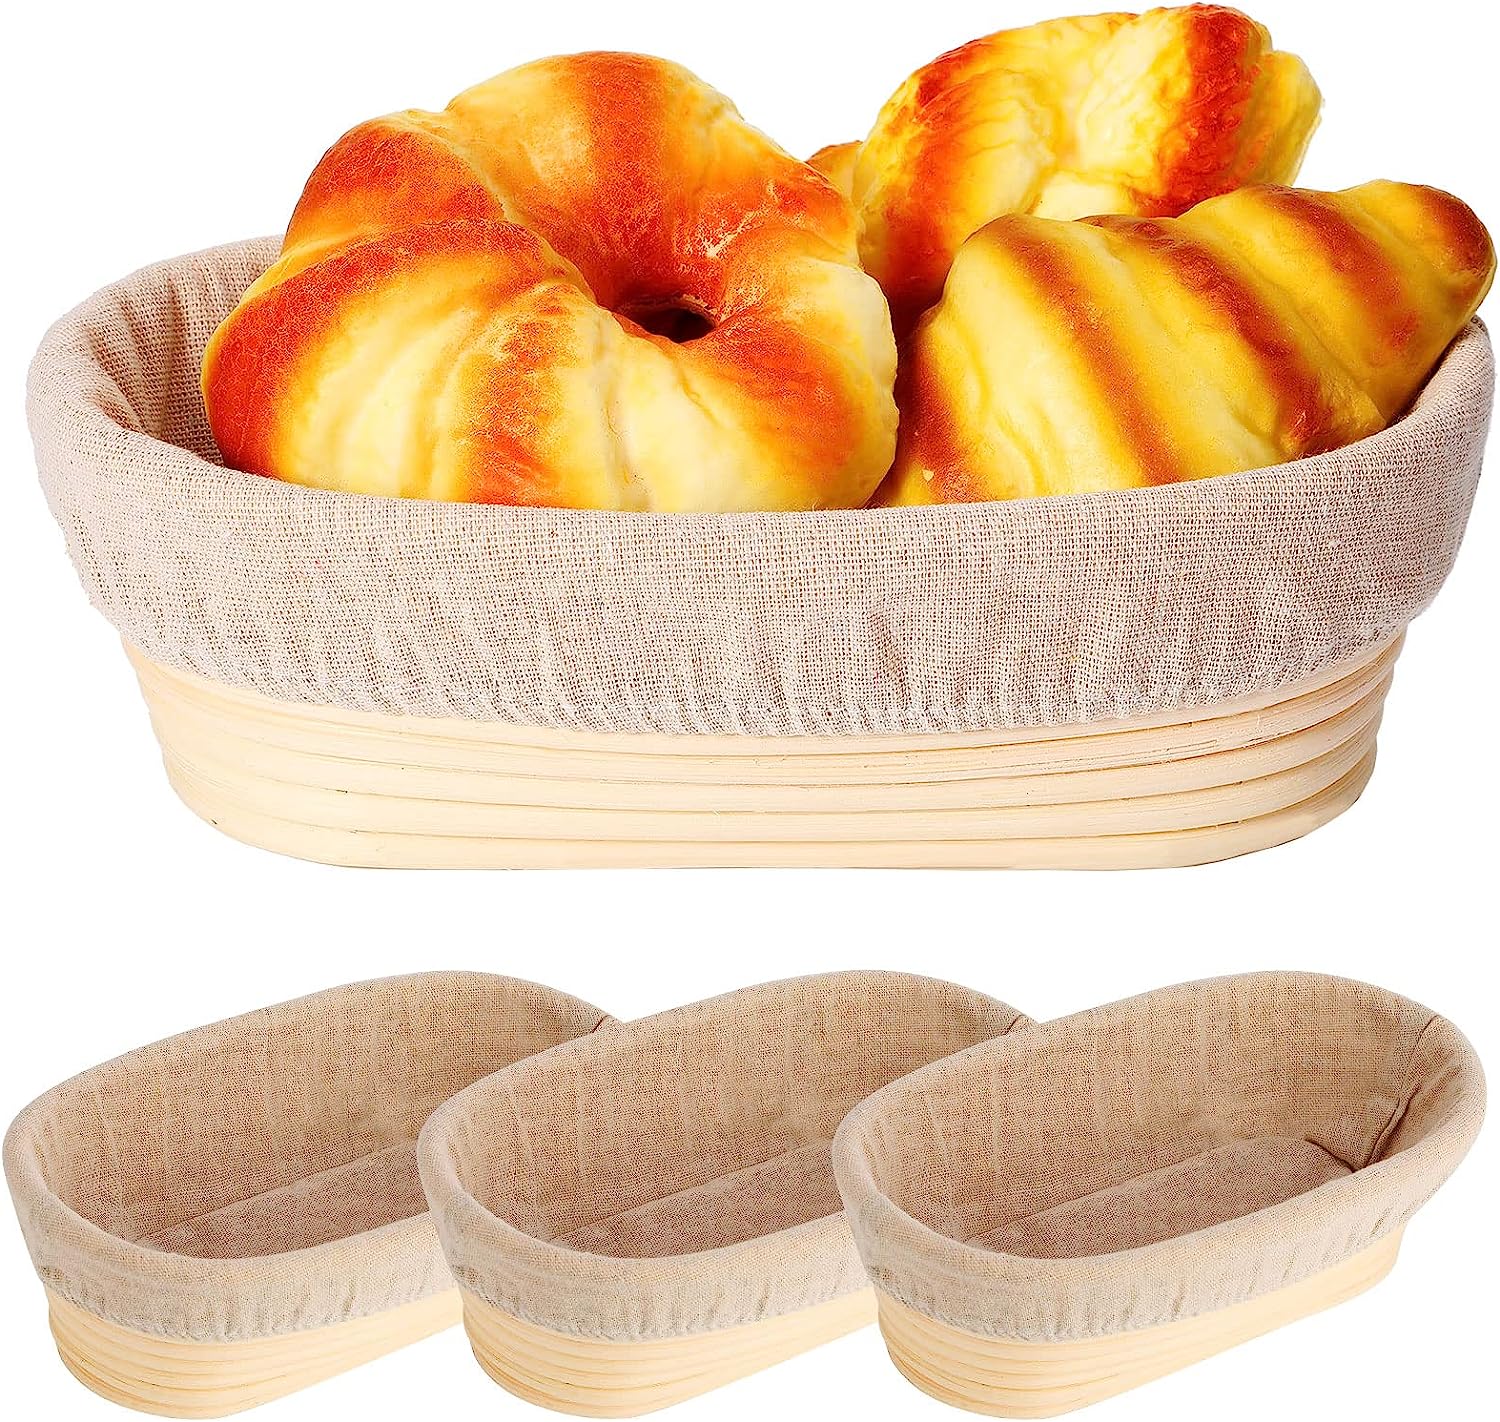 Wholesale banneton cesta to Organize and Tidy Up Your Home